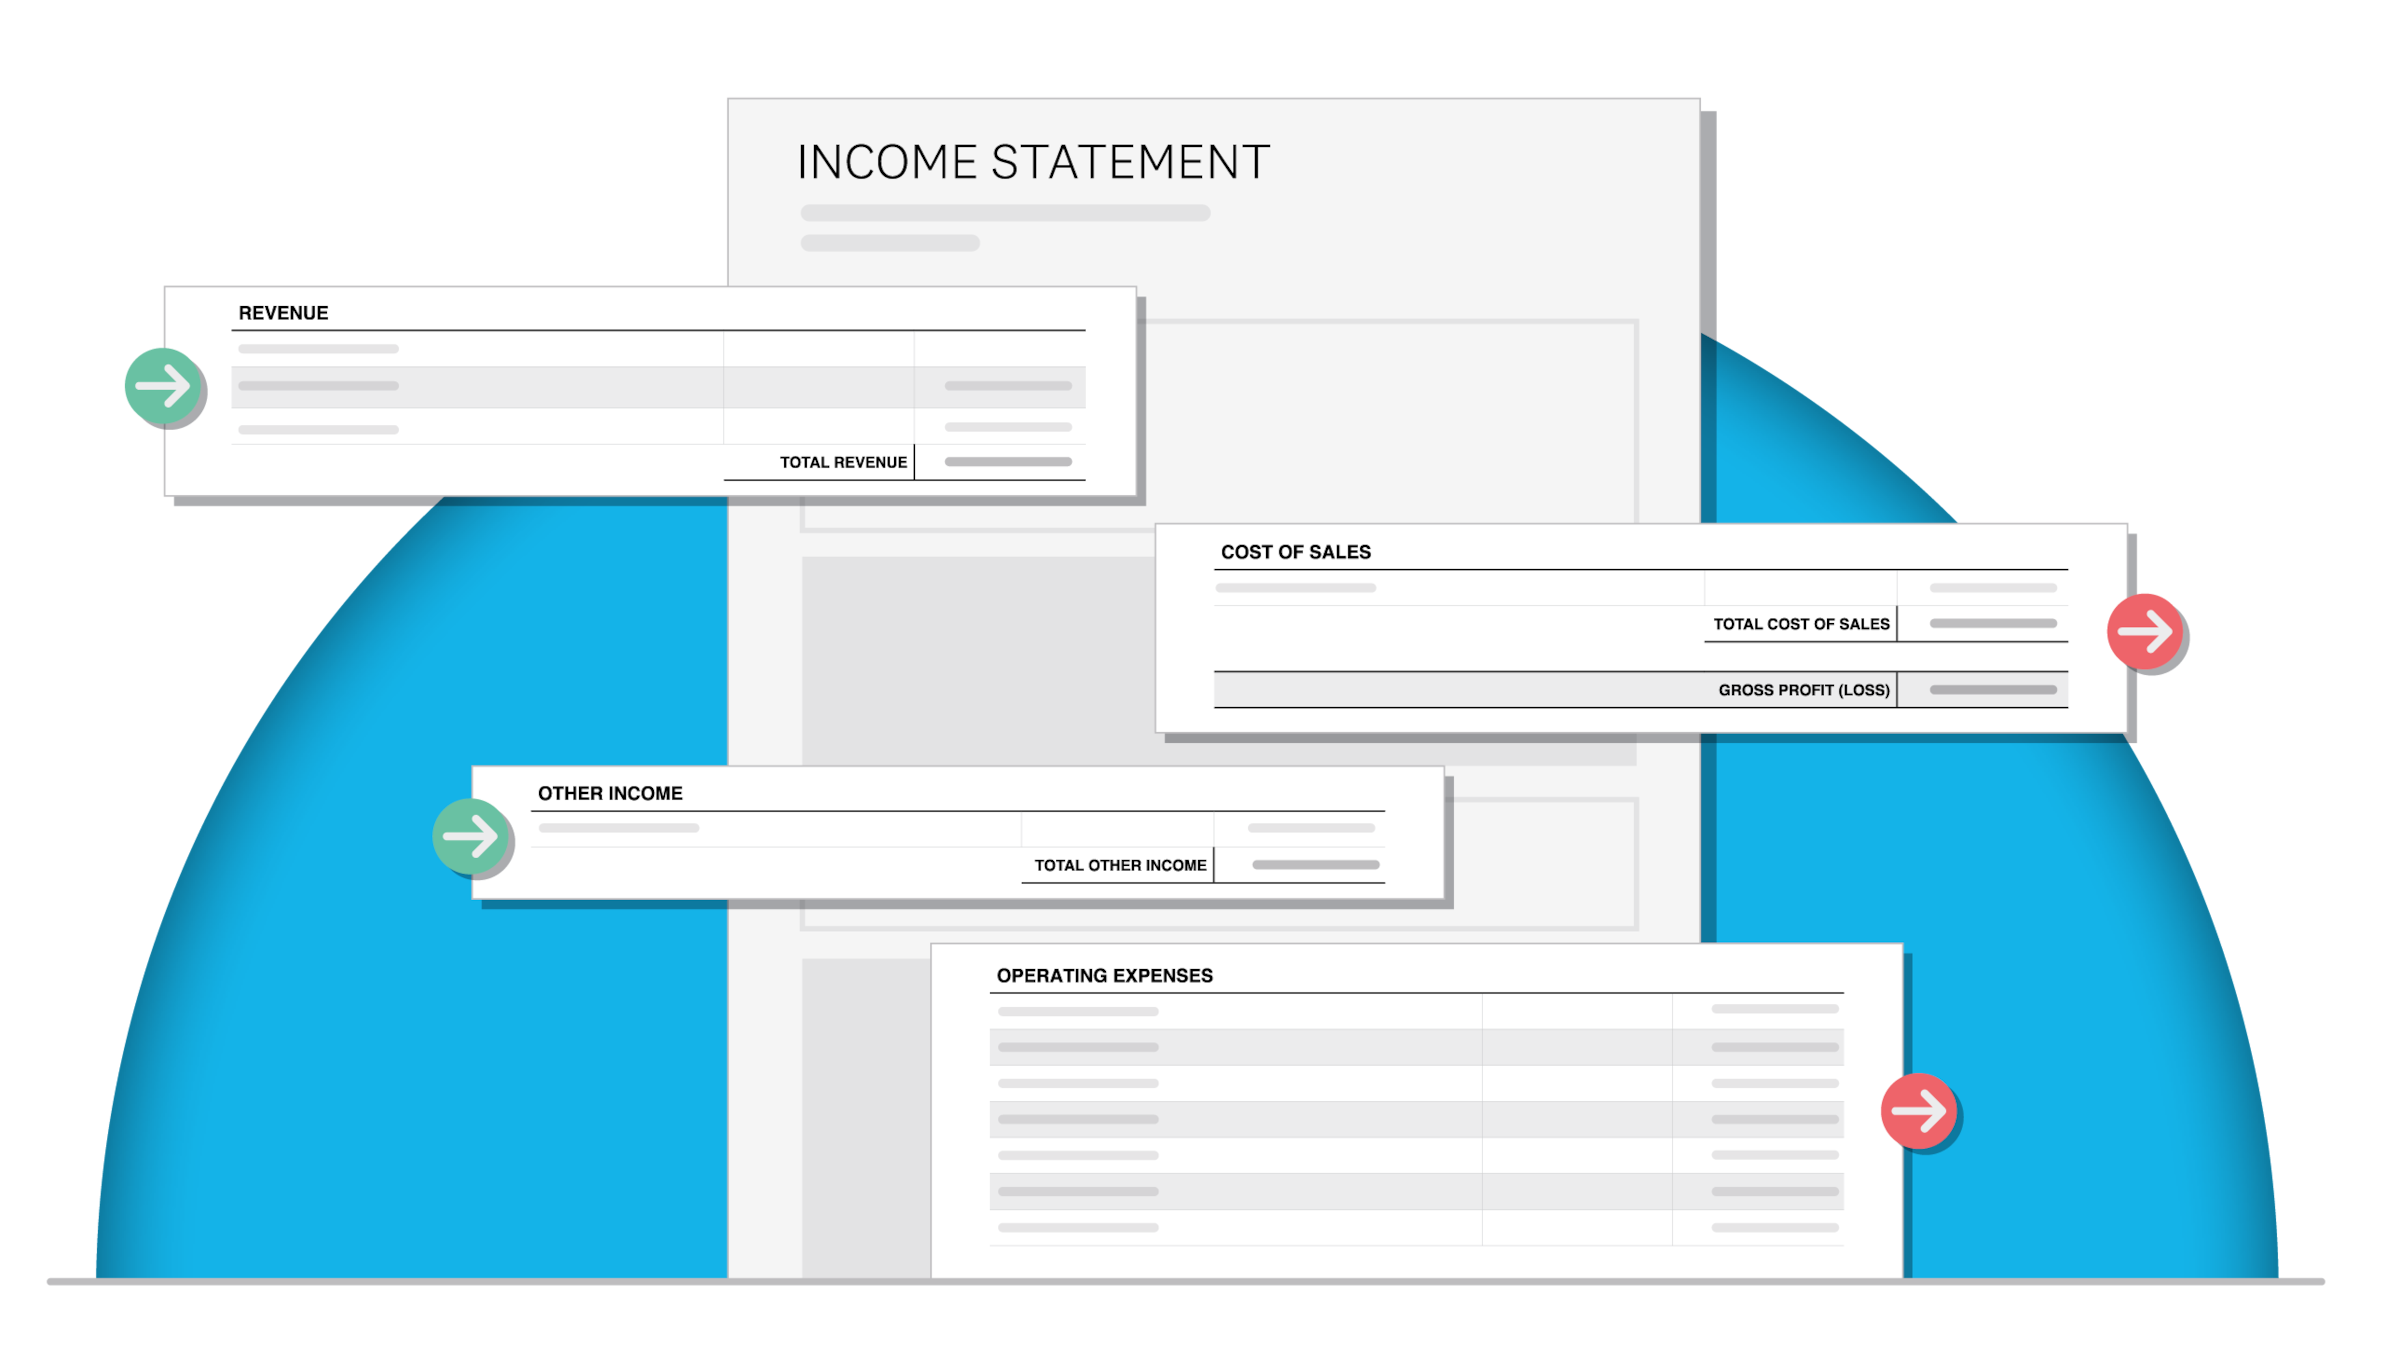 Income statement example shows key income and expense sections broken out.